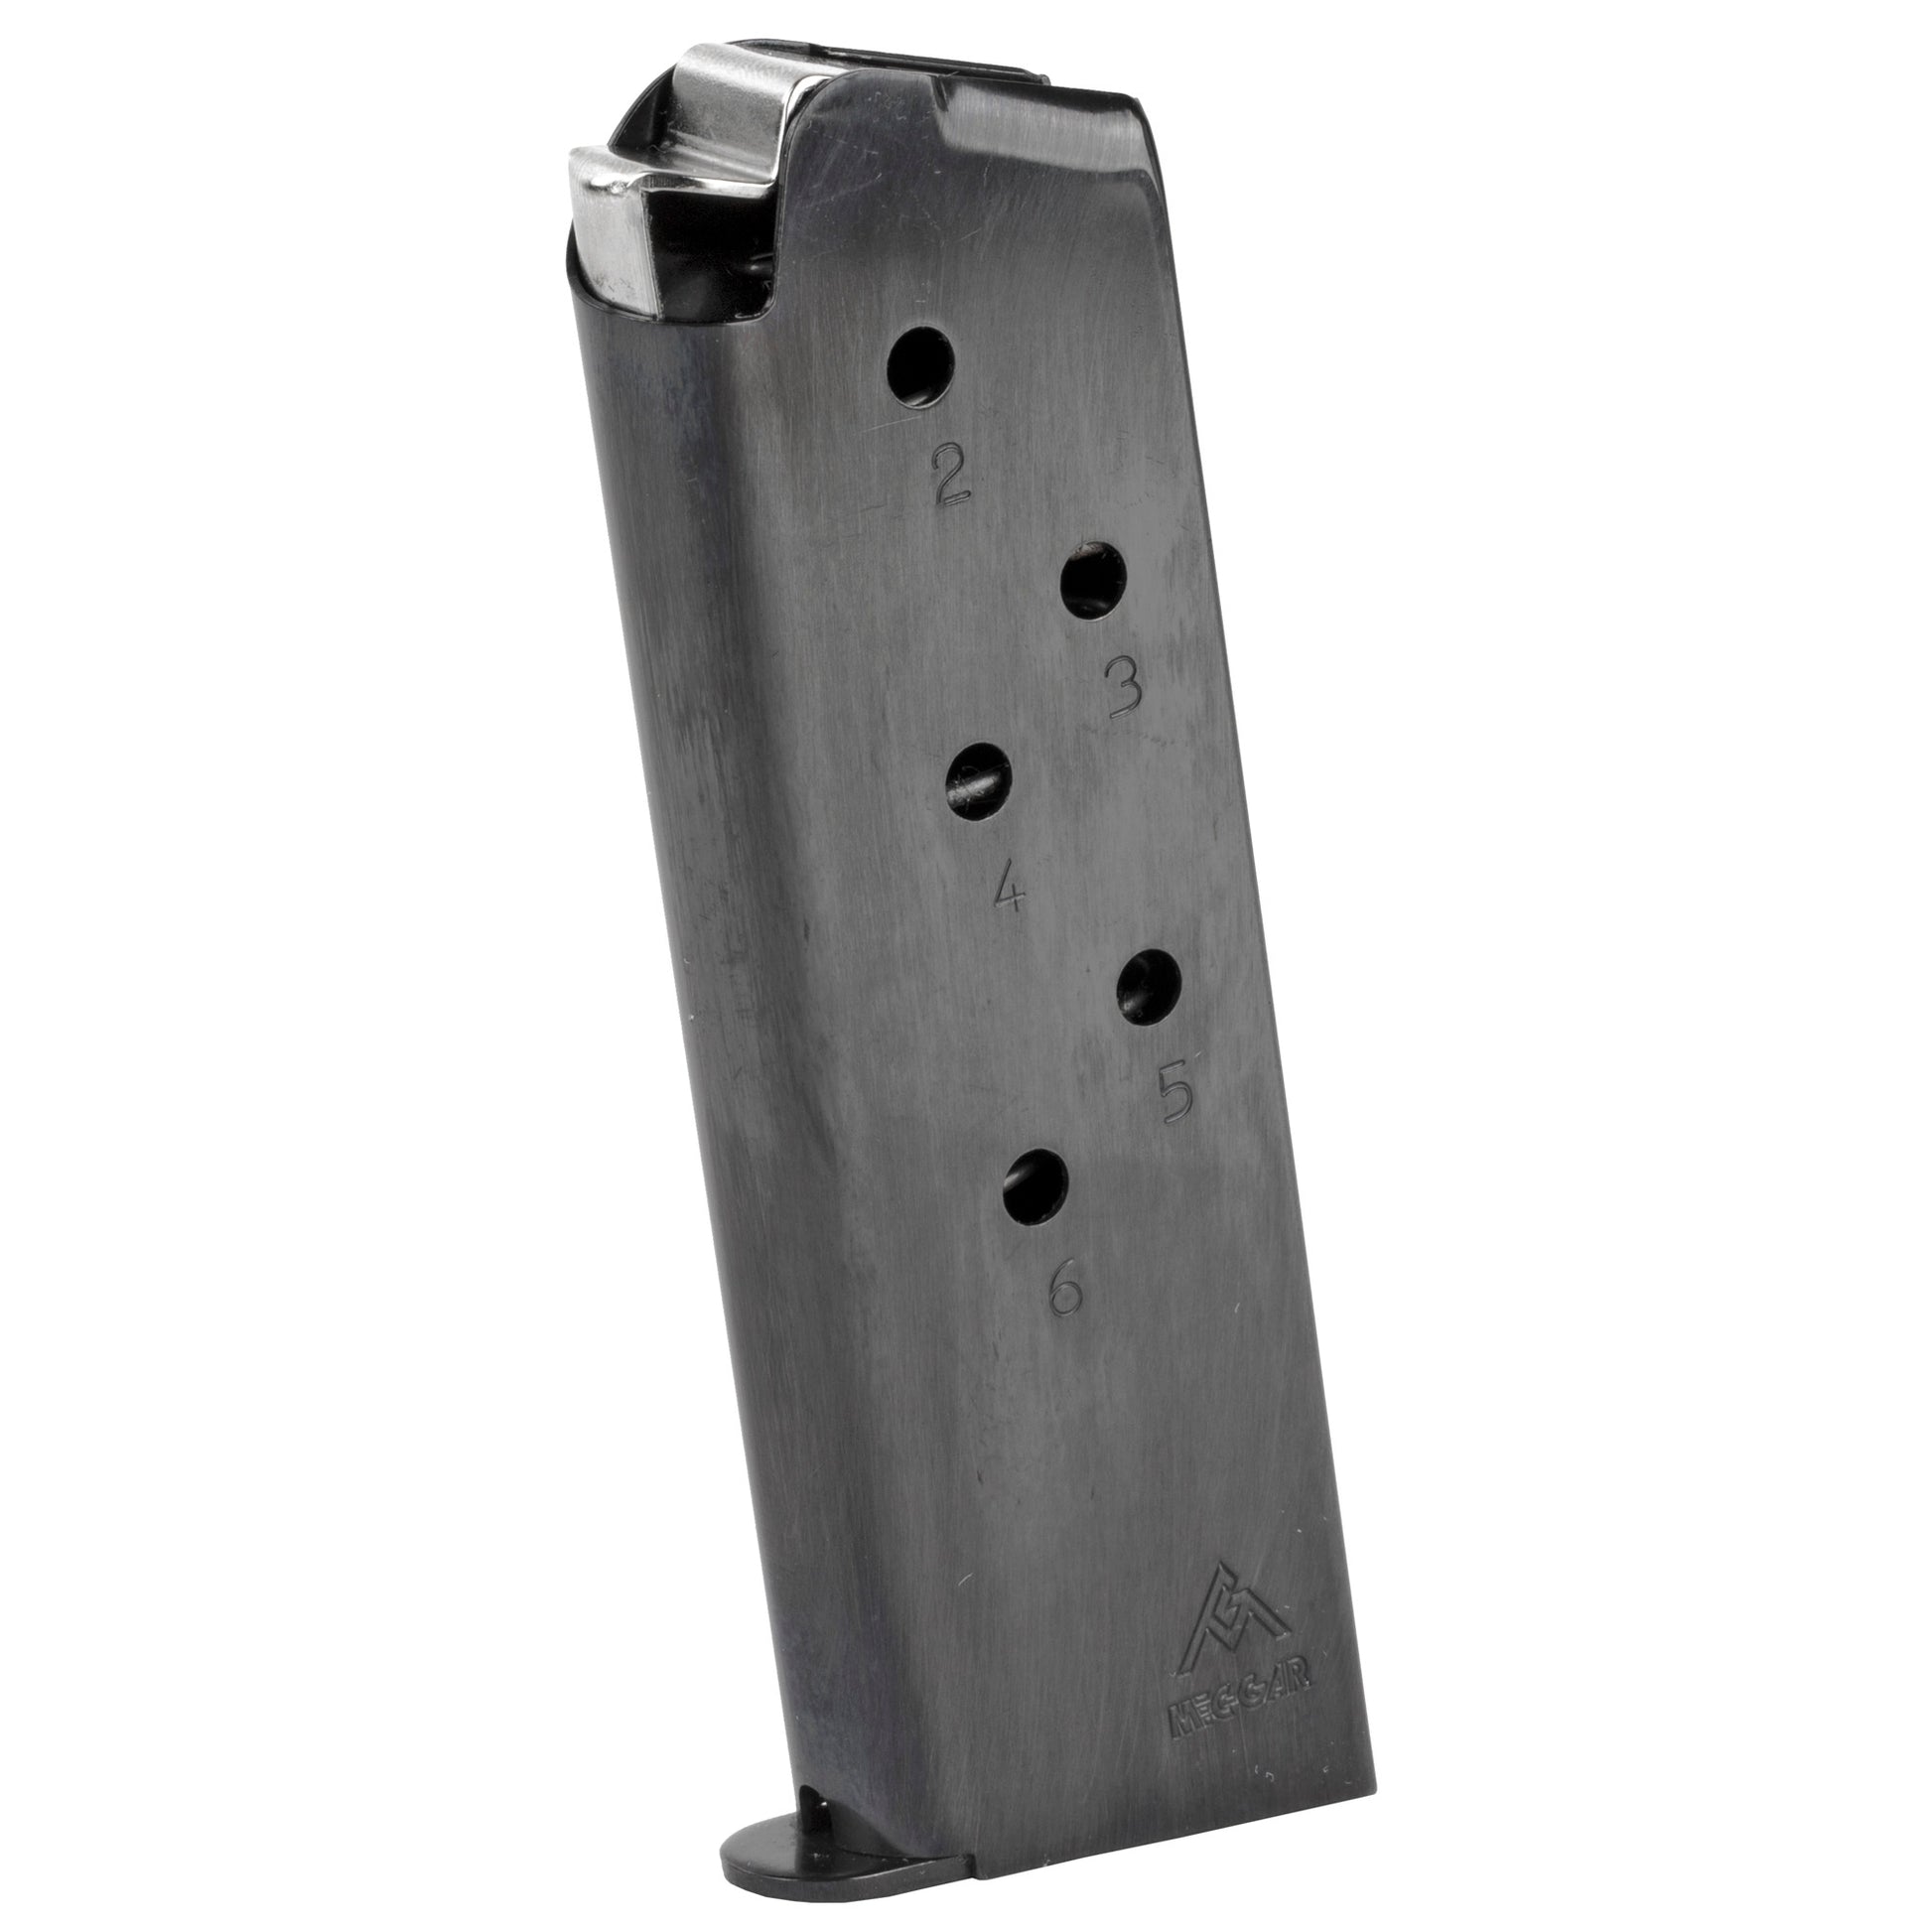 Mecgar Magazine 45ACP 6 Rounds Fits 1911 Officer Blued Finish MGCO4506B - California Shooting Supplies